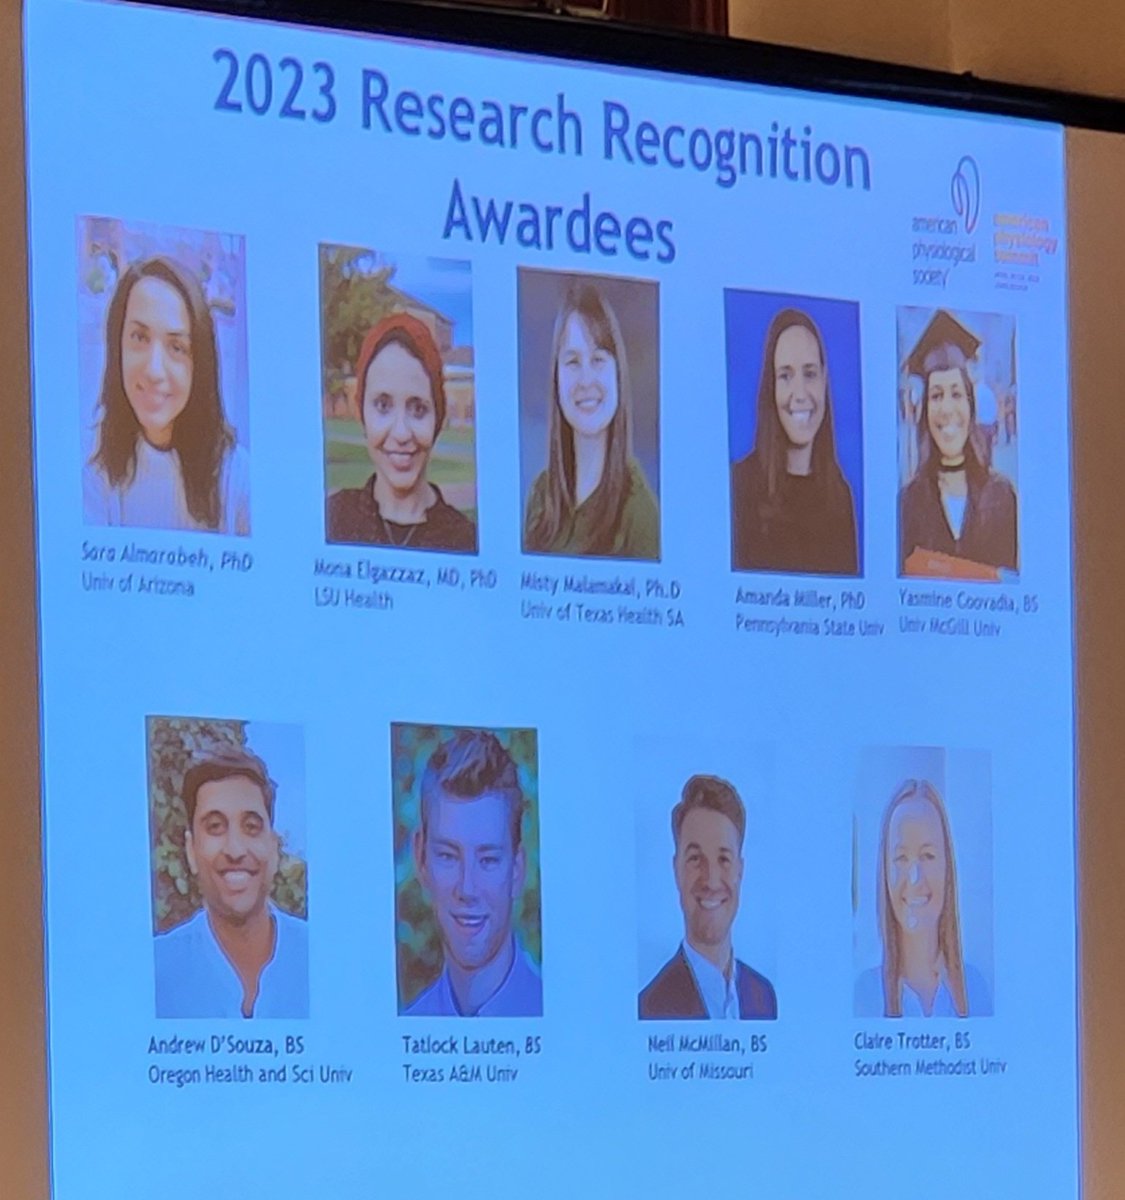 Couldn't be more proud of my 2nd year graduate student, Tatlock Lauten, for already receiving an APS research award! He has put in a ton of effort examing PTSD and inflammation... well deserved! #APSSummit2023 @TAMU @tamuresearch @TAMU_MedPhys @TAMUHealth